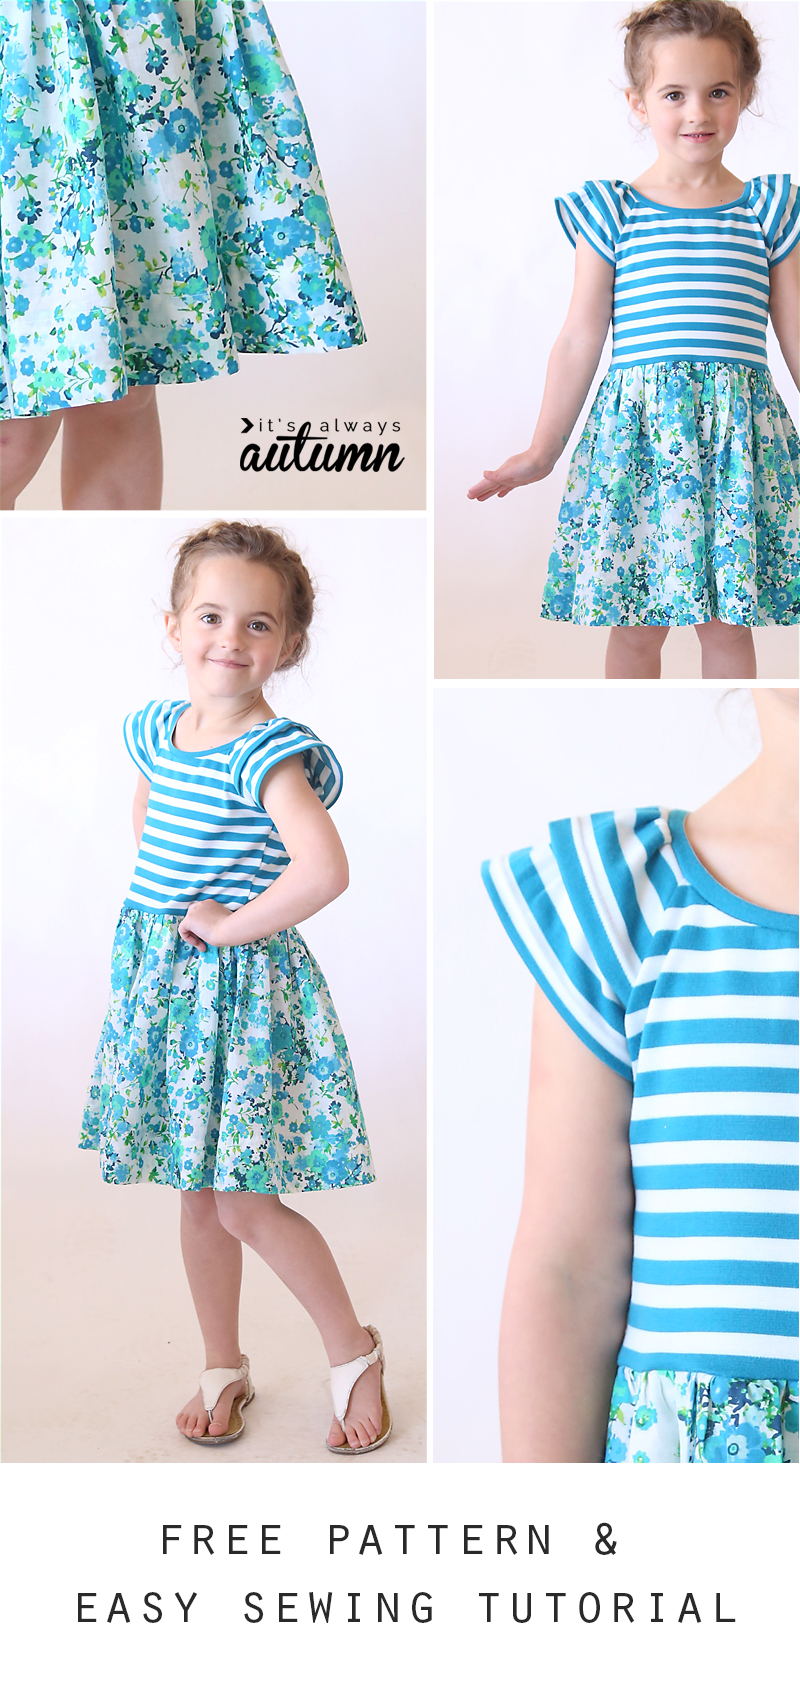 the-hello-spring-girls-dress-free-pattern-in-size-4-5-it-s-always-autumn